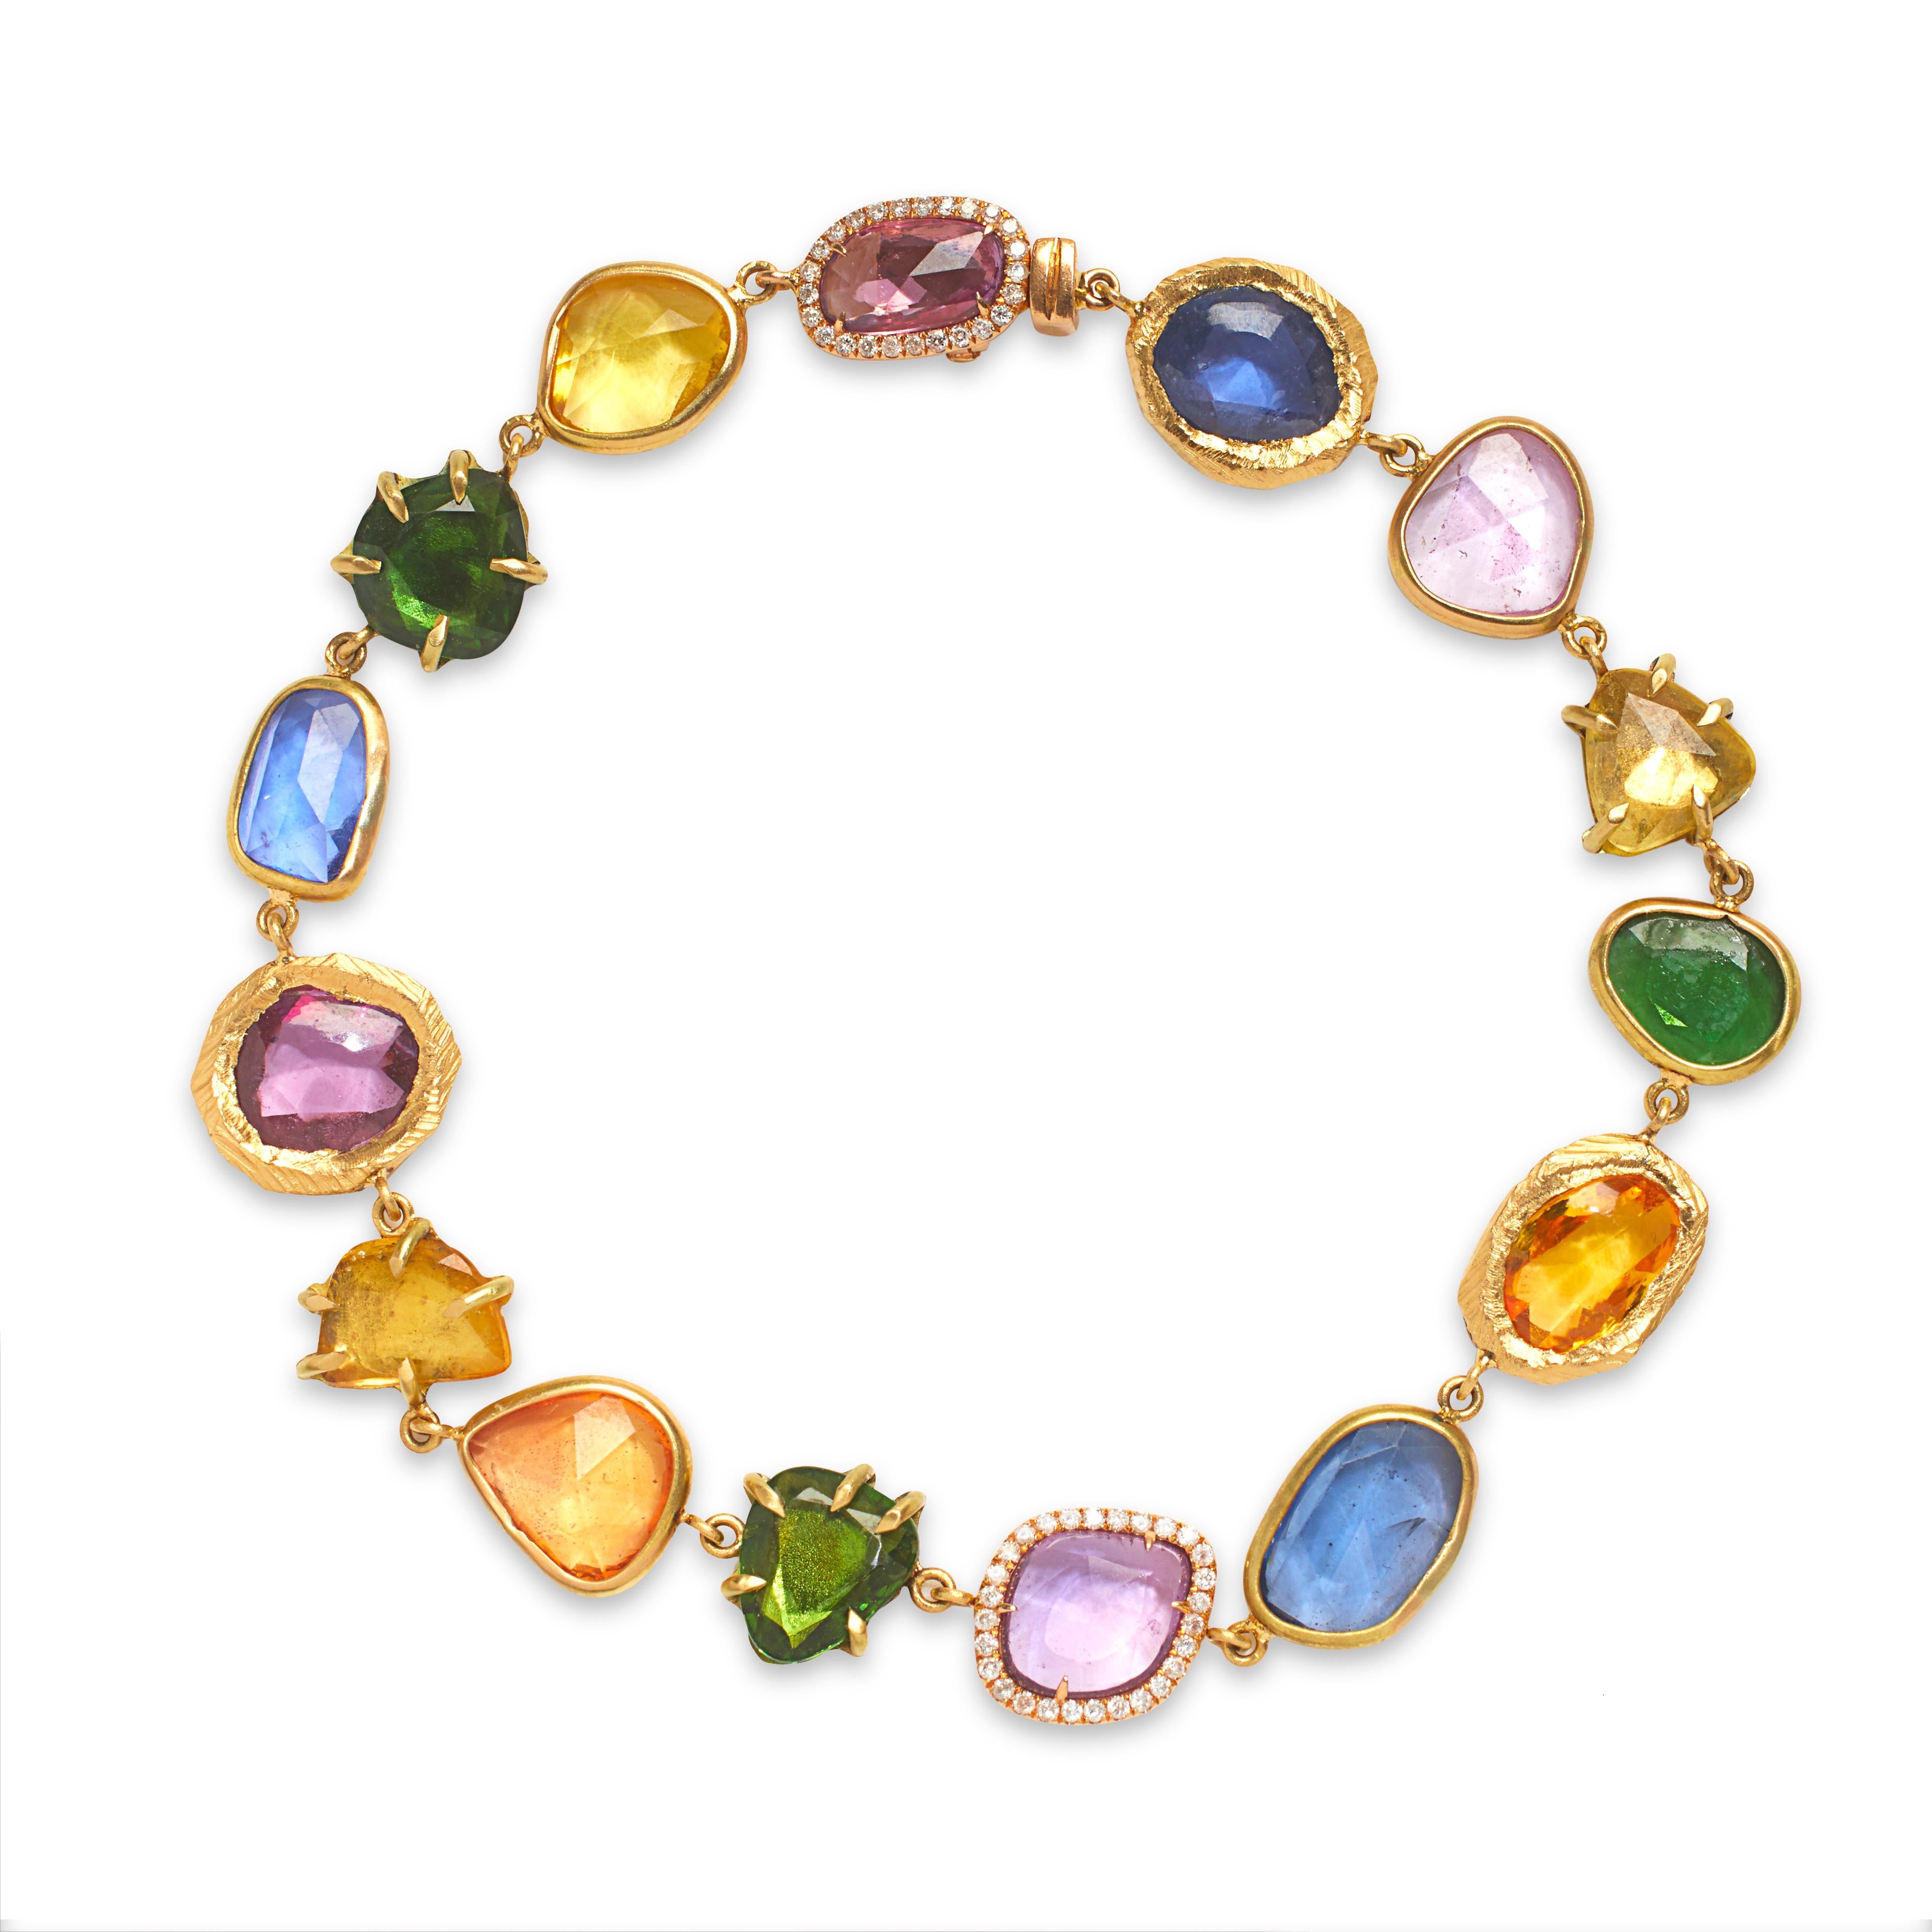 Handcarved 18KT Gold bracelet with multi-colored sapphires including diamonds, tsavorite garnets, blue sapphires, orange sapphires, and pink sapphires.  One-of-a-kind bracelet with 21.85 total carats weight (18.48 sapphires and 3.37 tsavorites). 